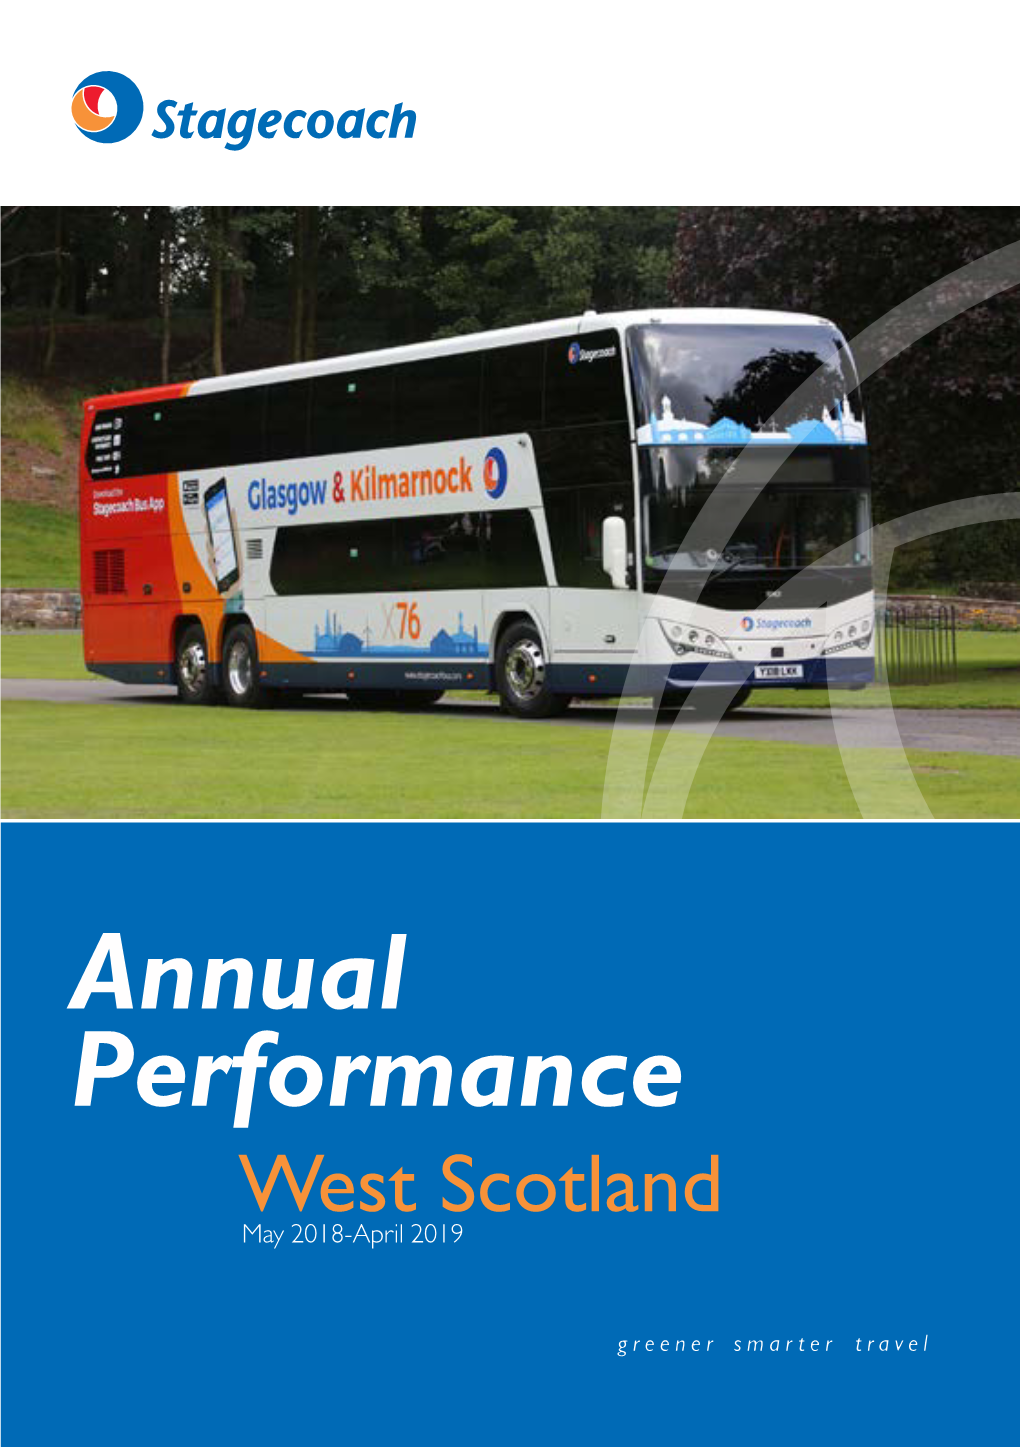 Annual Performance West Scotland May 2018-April 2019 Key Facts 27 Million Passenger Journeys Were Made on Stagecoach West Scotland Buses